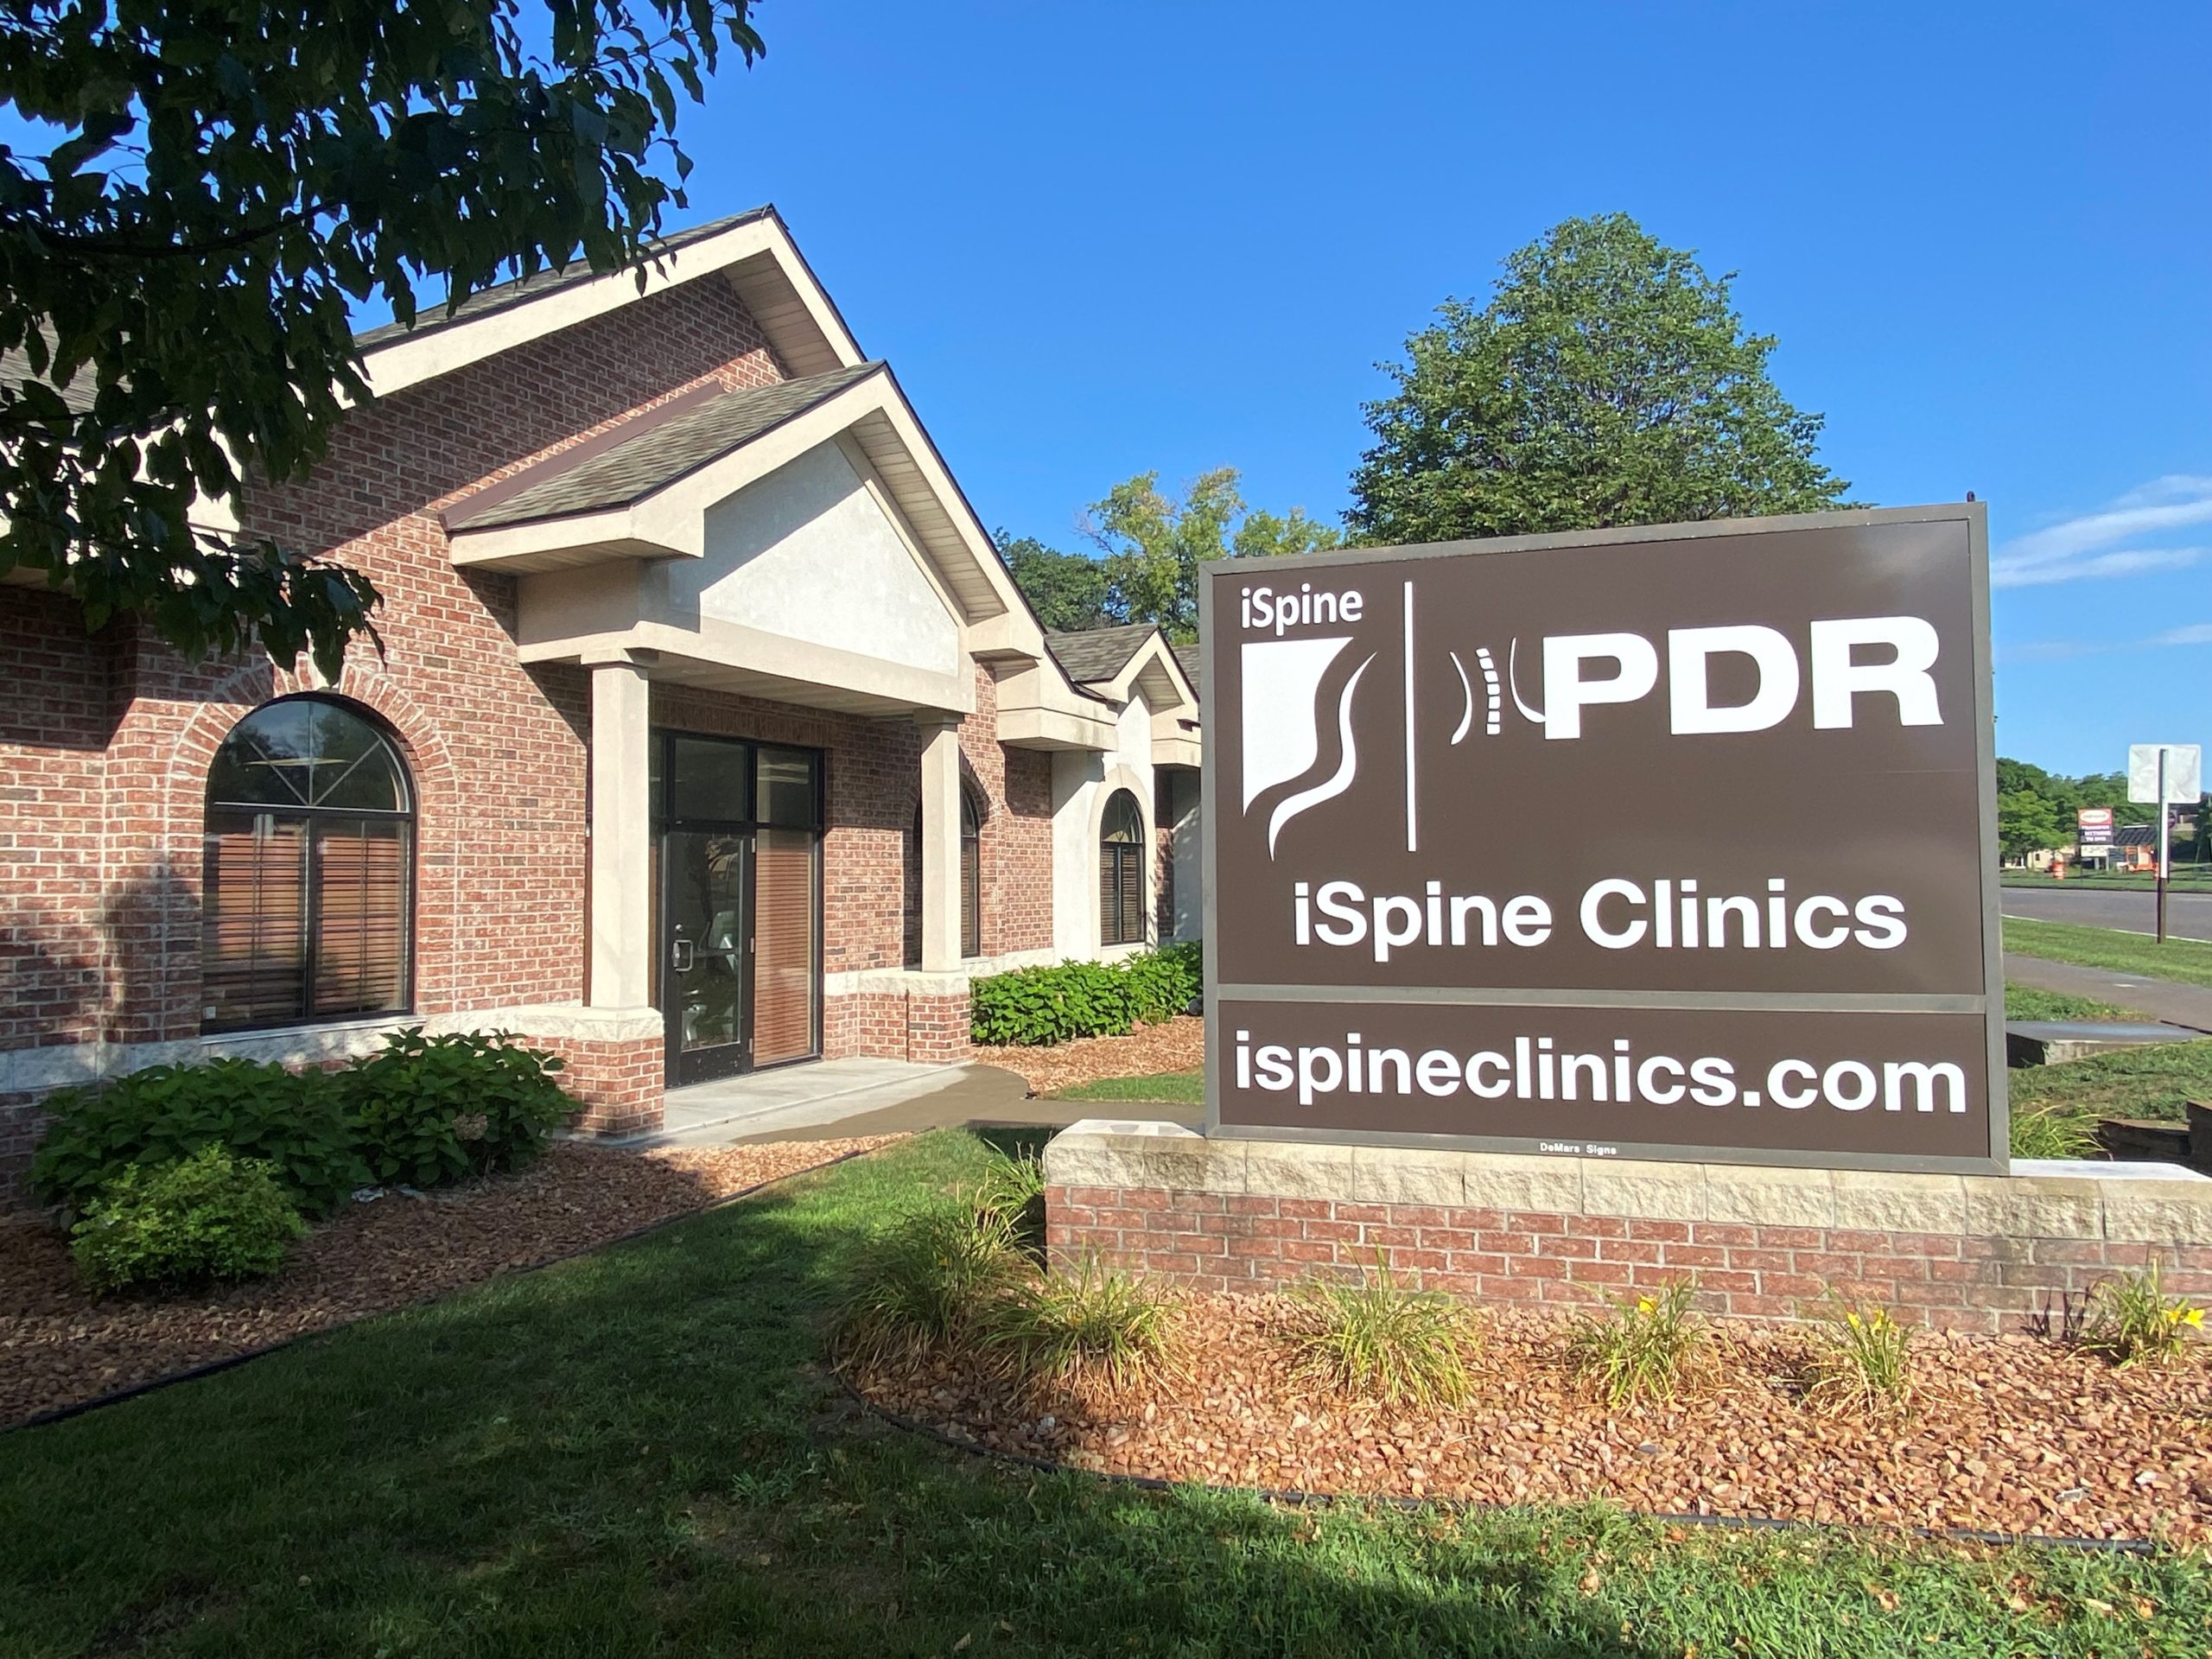 iSpine PDR Coon Rapids MN